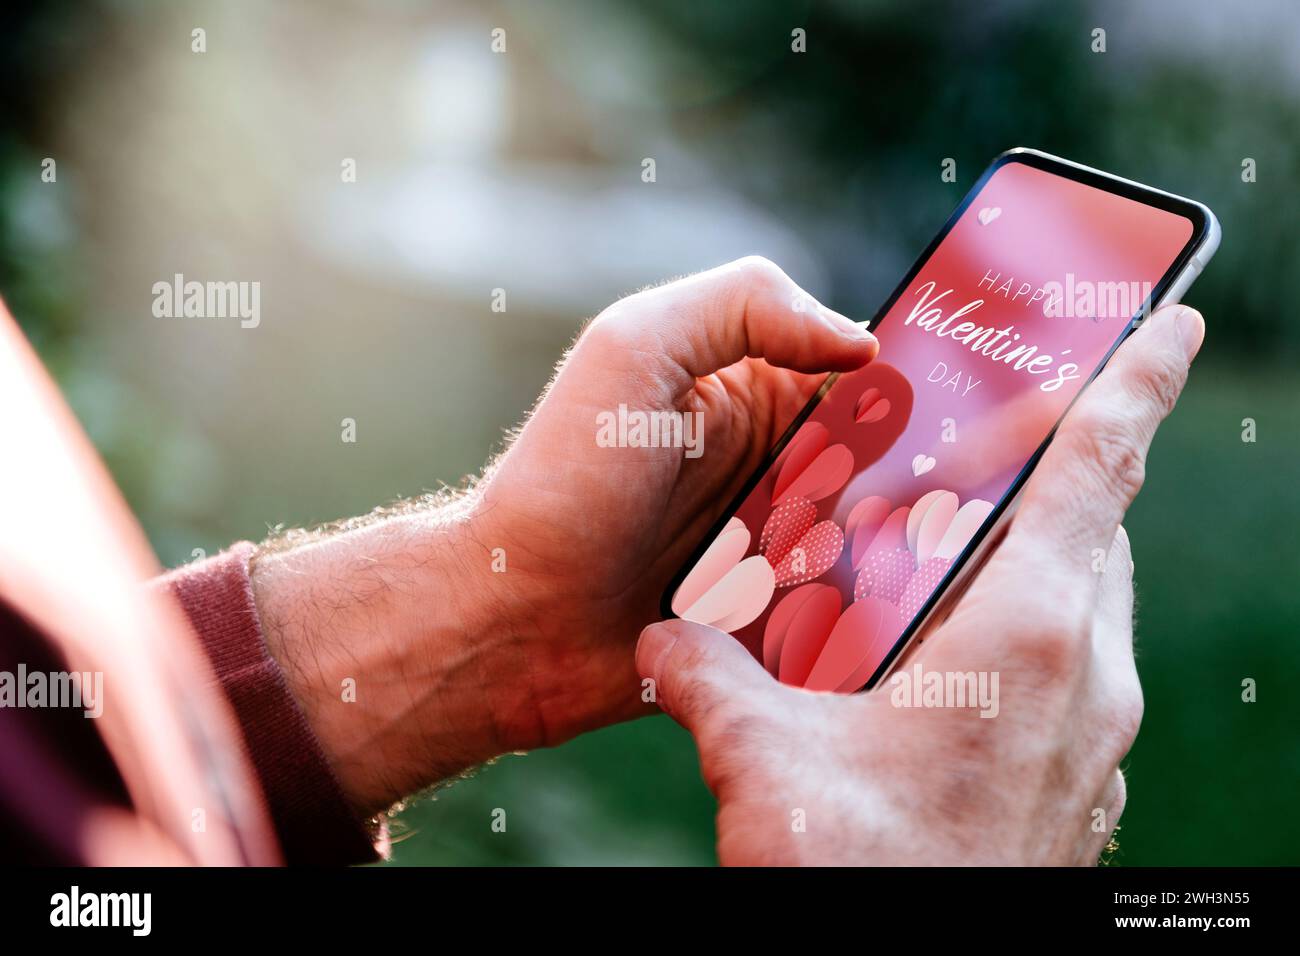 Man showing a digital Valentine's Day greeting card in the mobile phone screen. Stock Photo